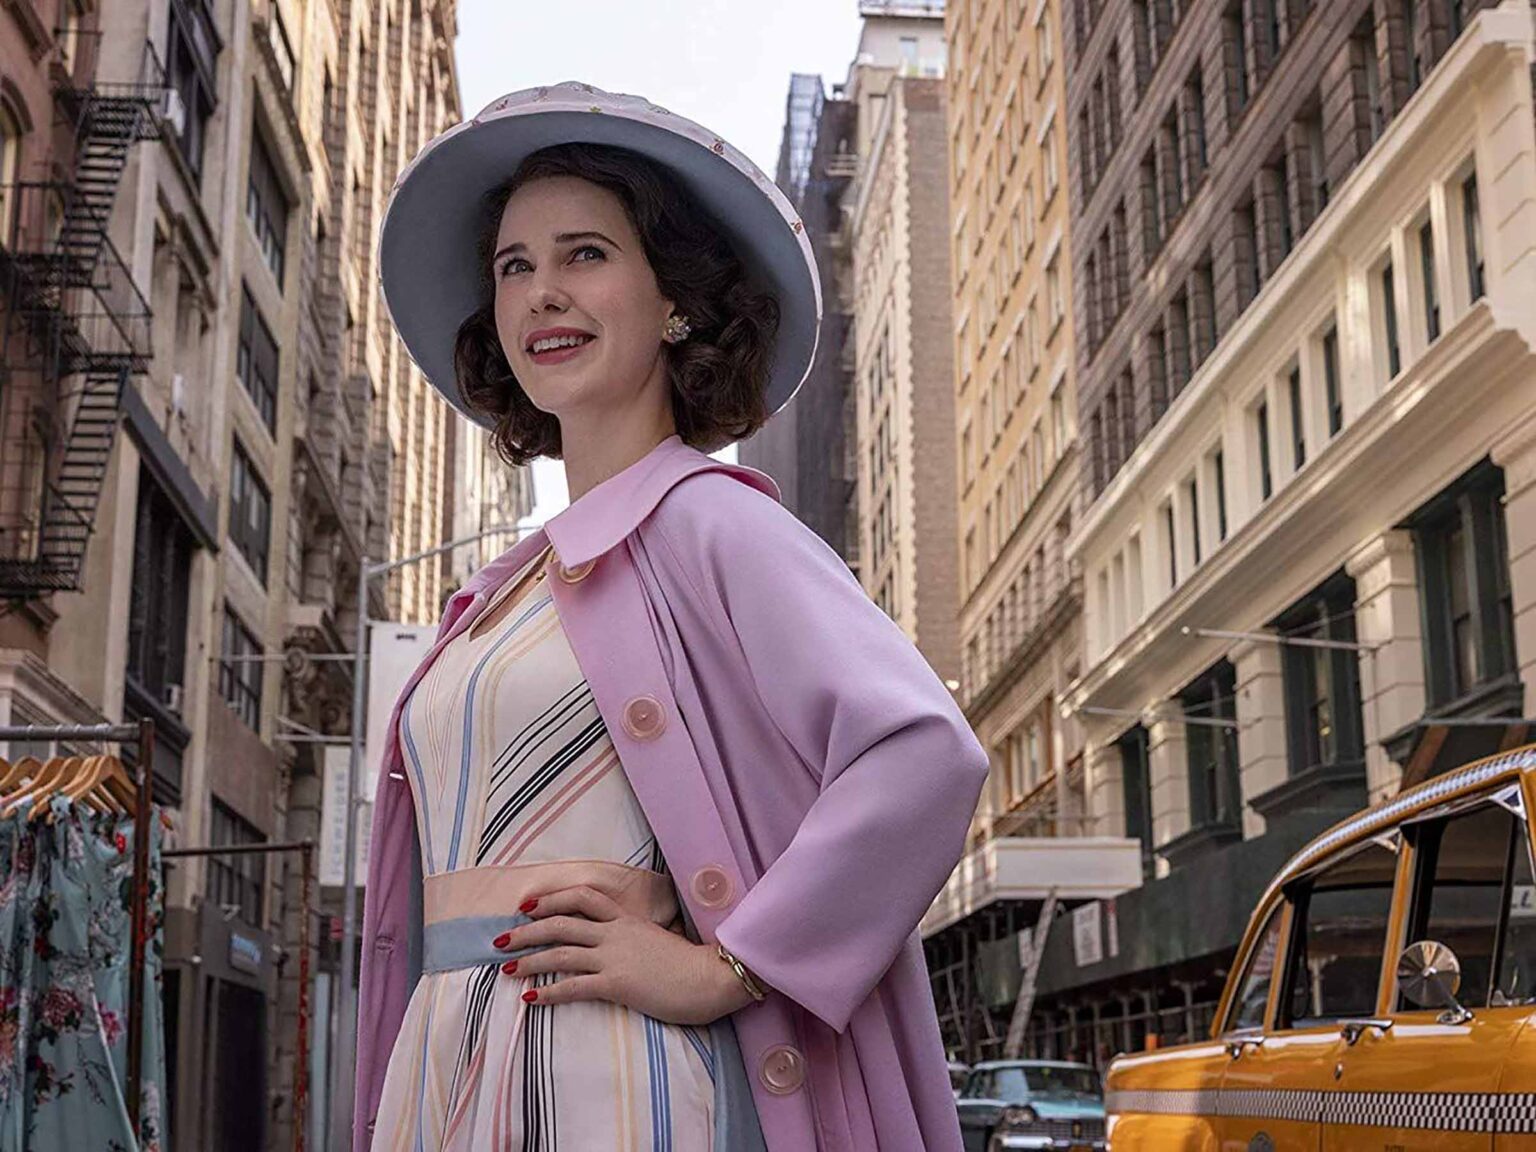 The Amazon Prime hit 'The Marvelous Mrs. Maisel' is returning for season 4! Whet your appetite with some of the best moments of the past 3 seasons.